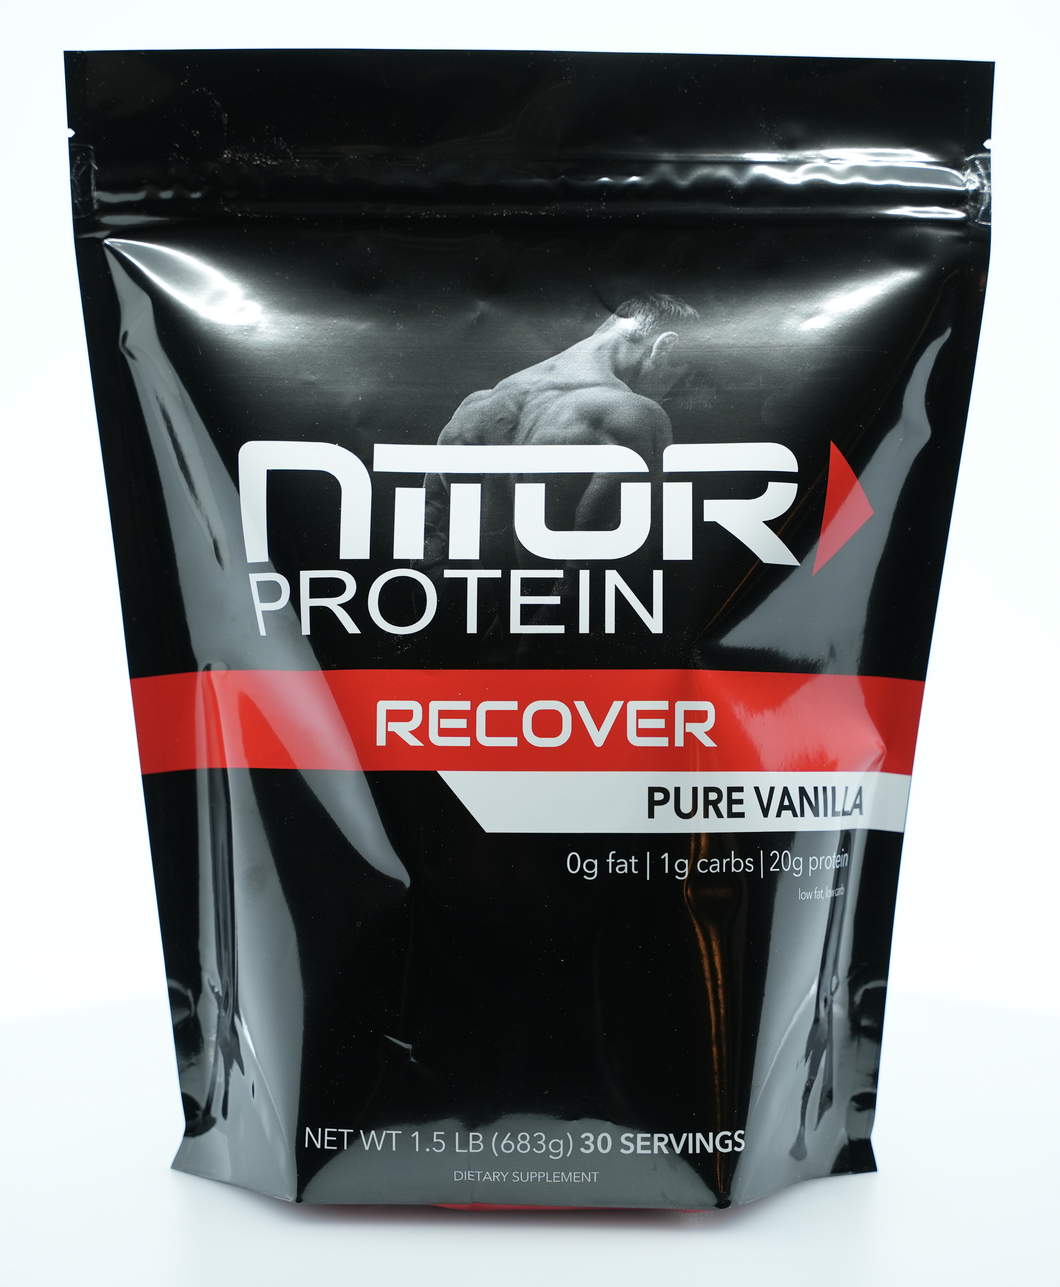 RECOVER: PURE VANILLA WHEY PROTEIN ISOLATE (Low Carb)